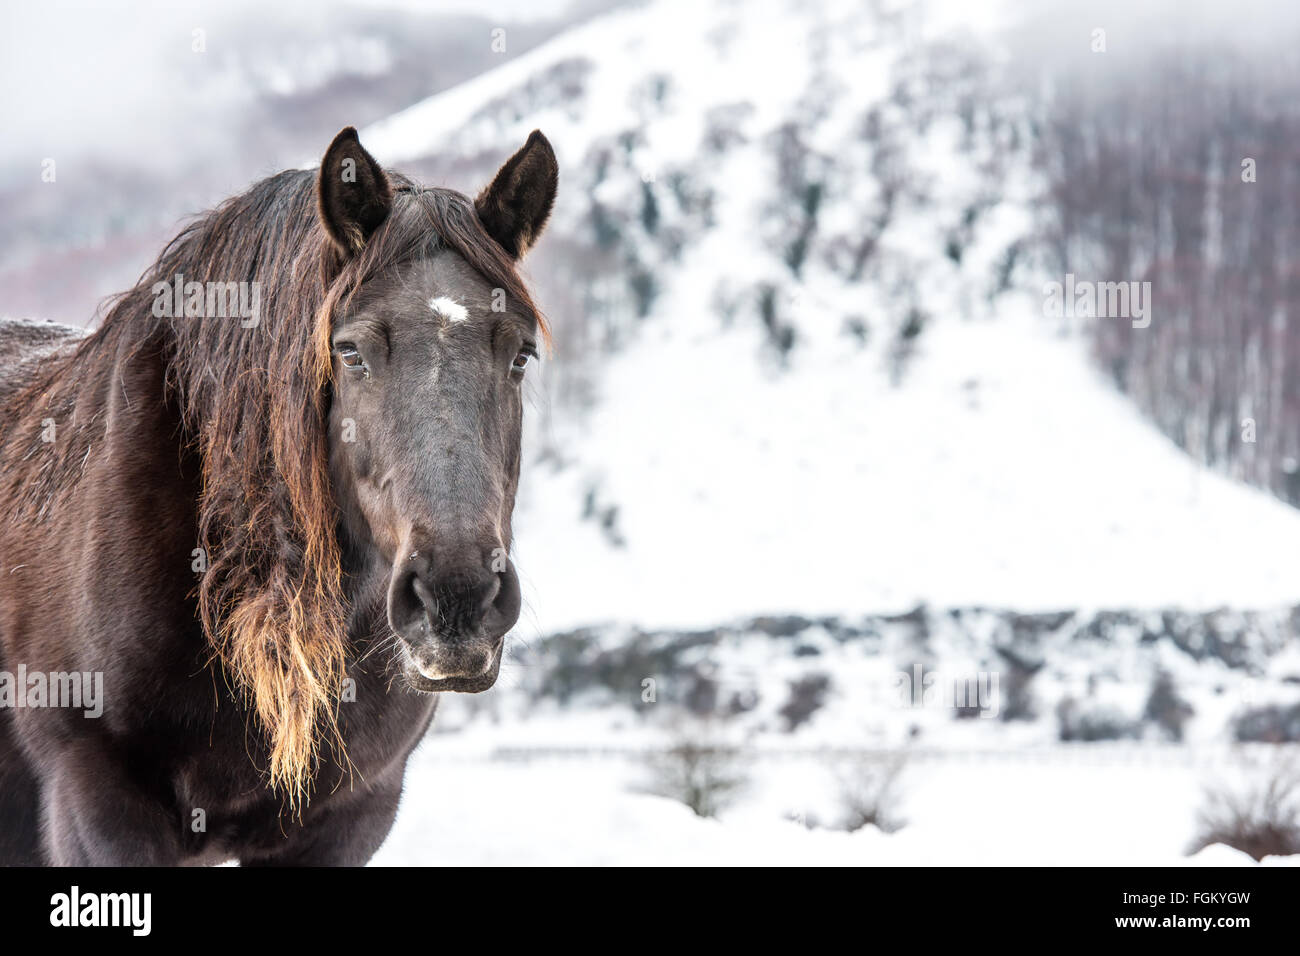 Brown horse with long black and blonde hair on the snow Stock Photo